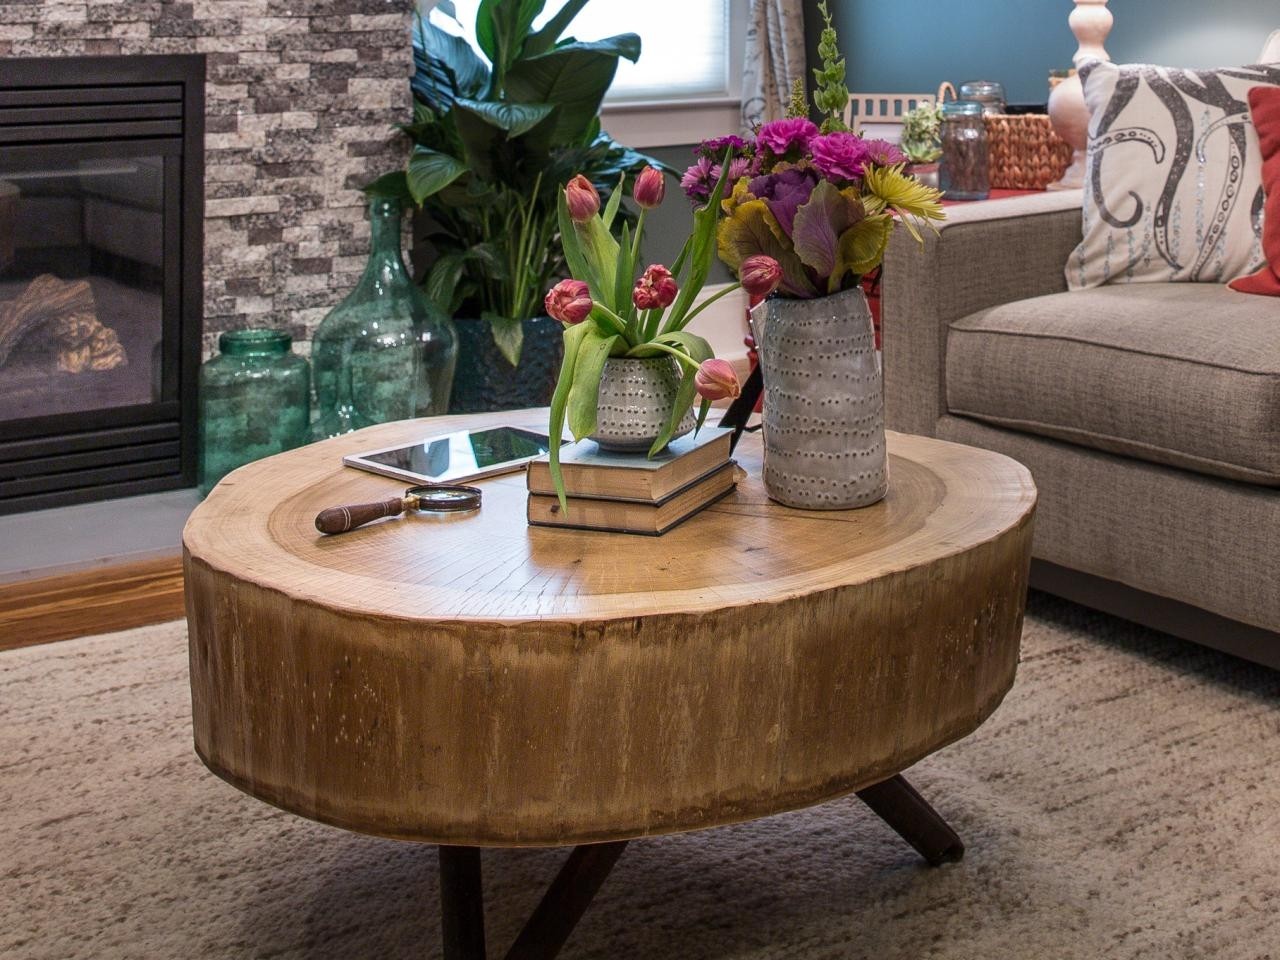 How to build a round coffee table